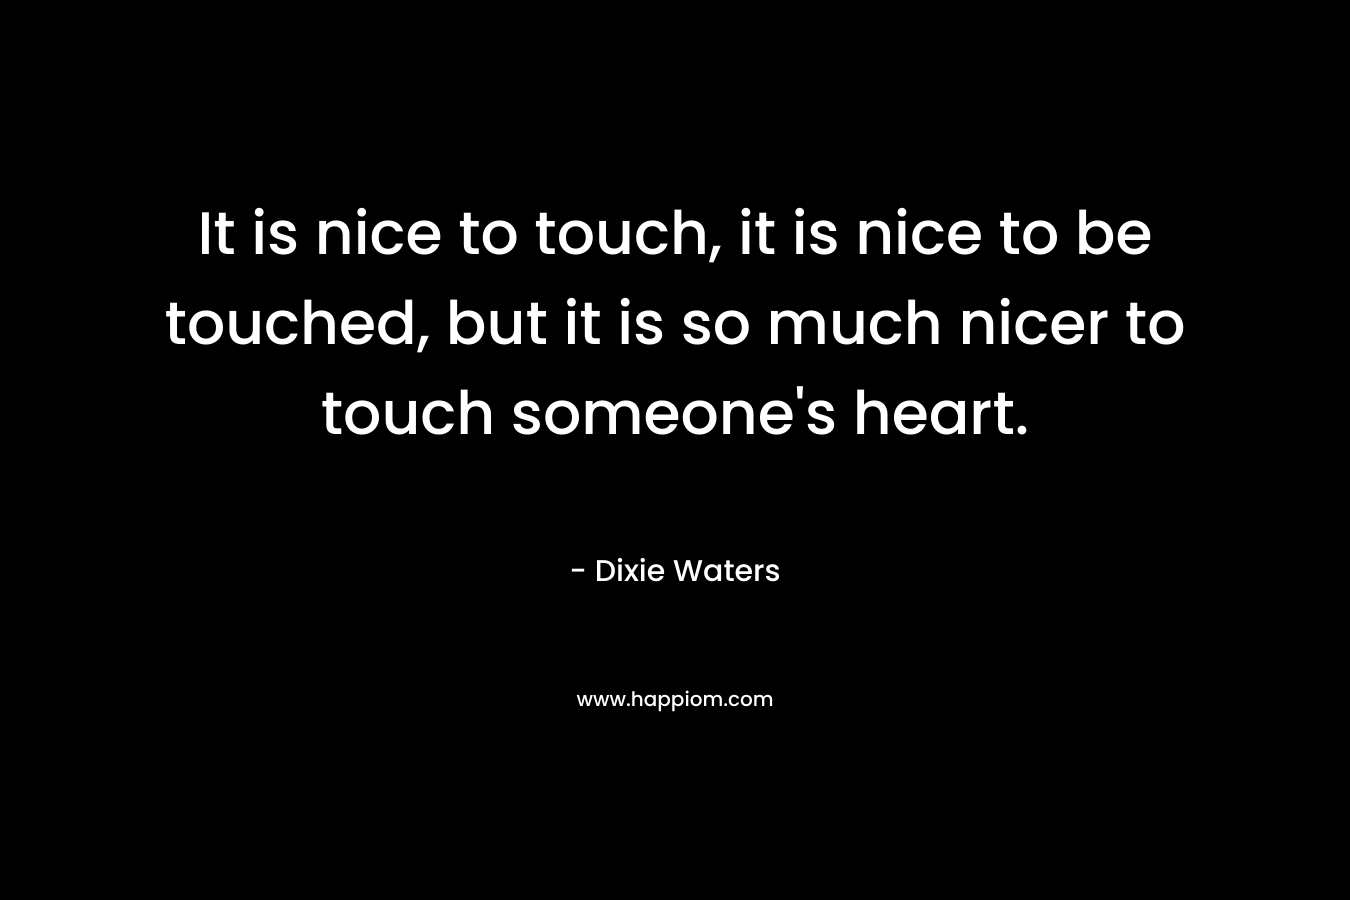 It is nice to touch, it is nice to be touched, but it is so much nicer to touch someone’s heart. – Dixie Waters